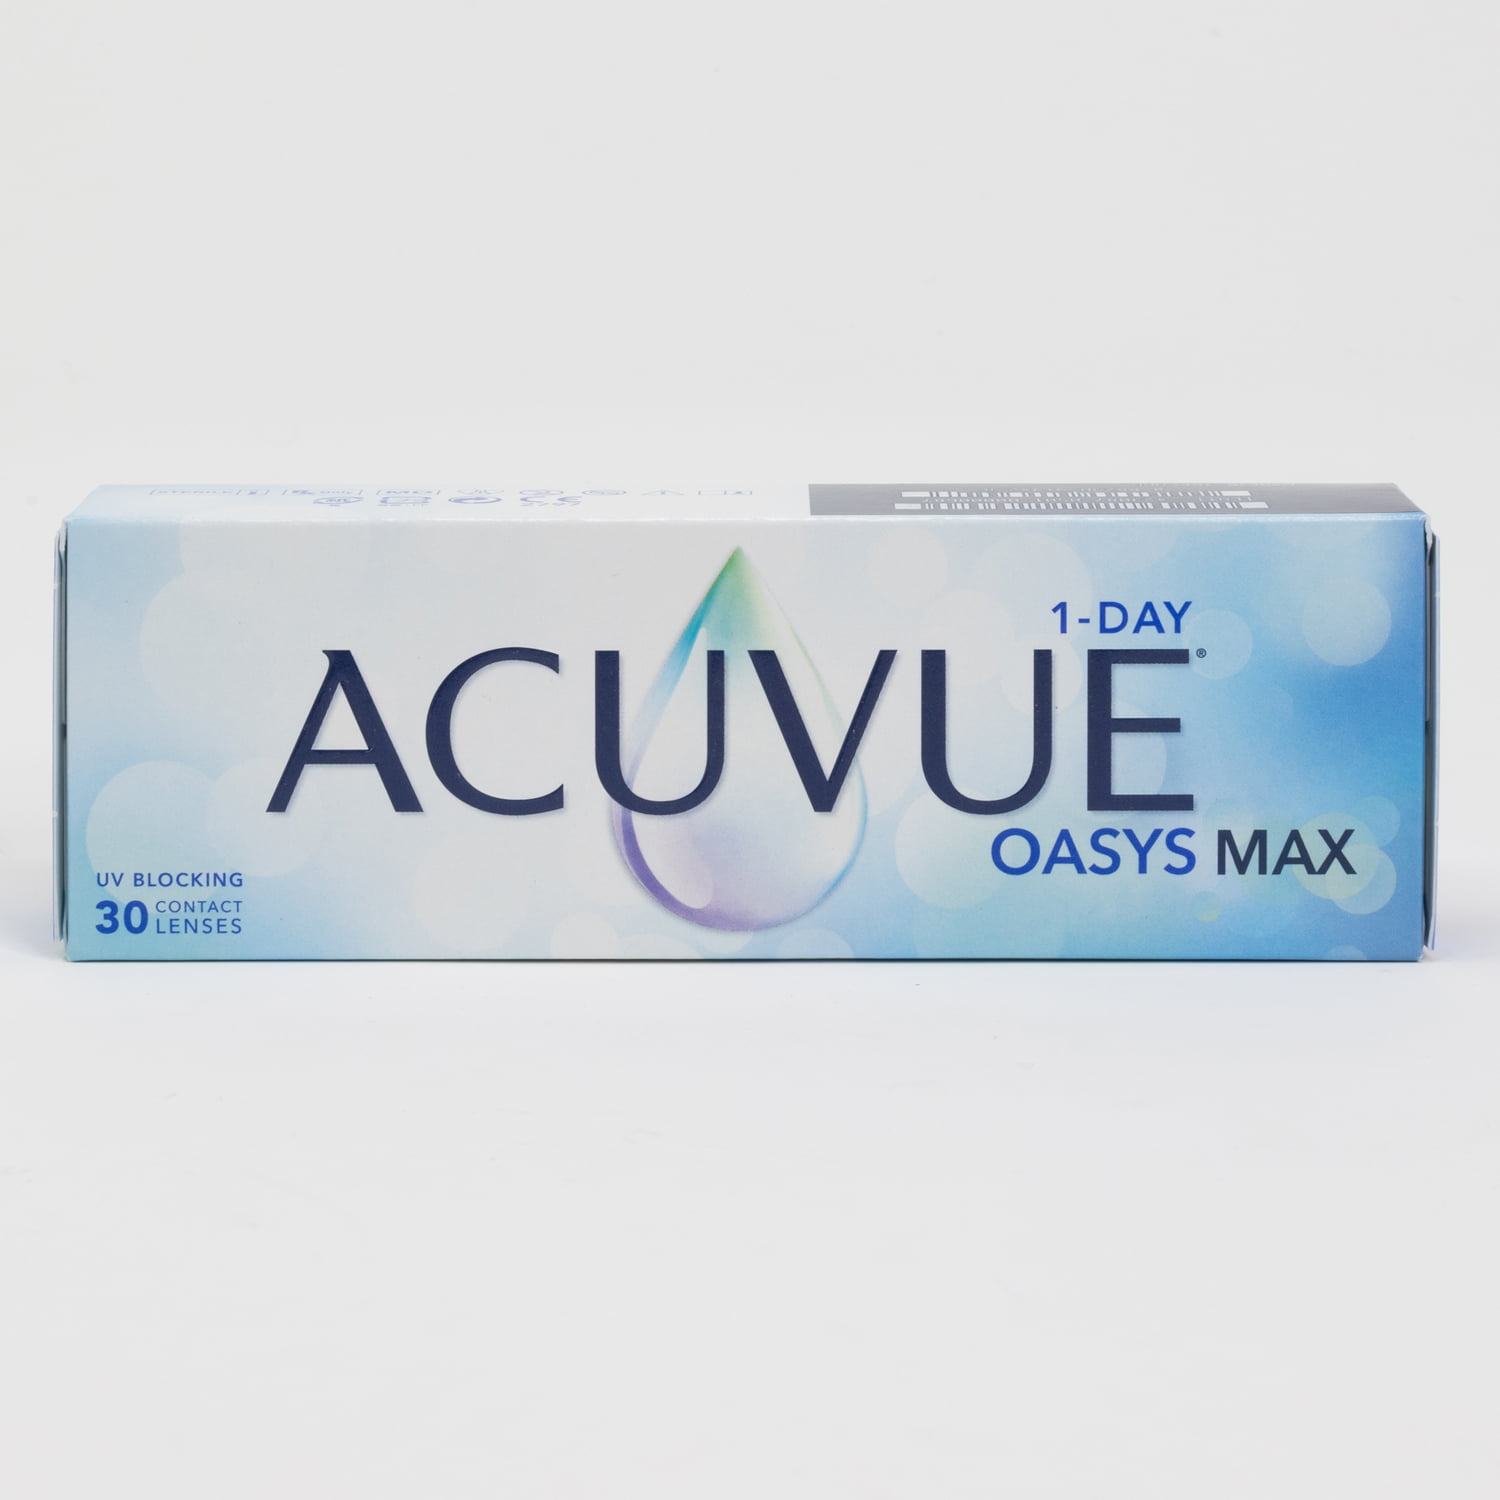 acuvue-oasys-max-1-day-optiblue-technology-30-pack